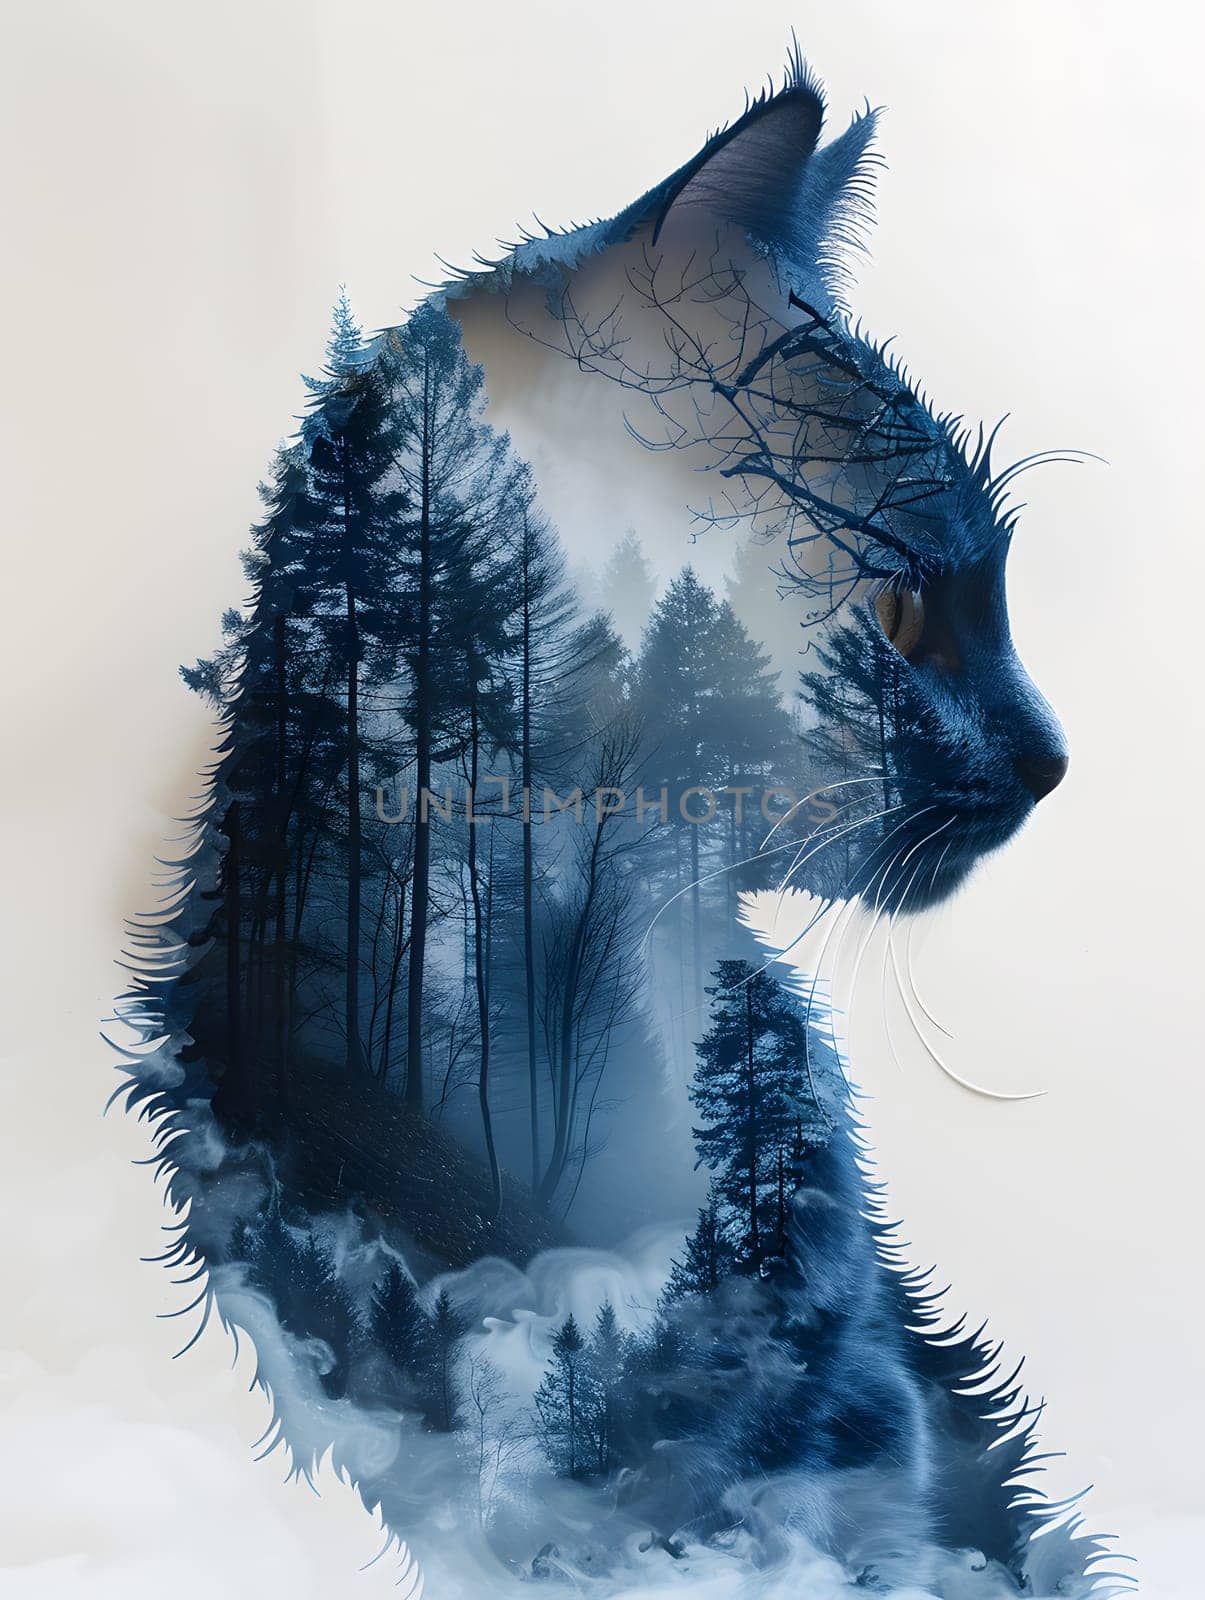 Double exposure of a Felidae with whiskers and electric blue background by Nadtochiy